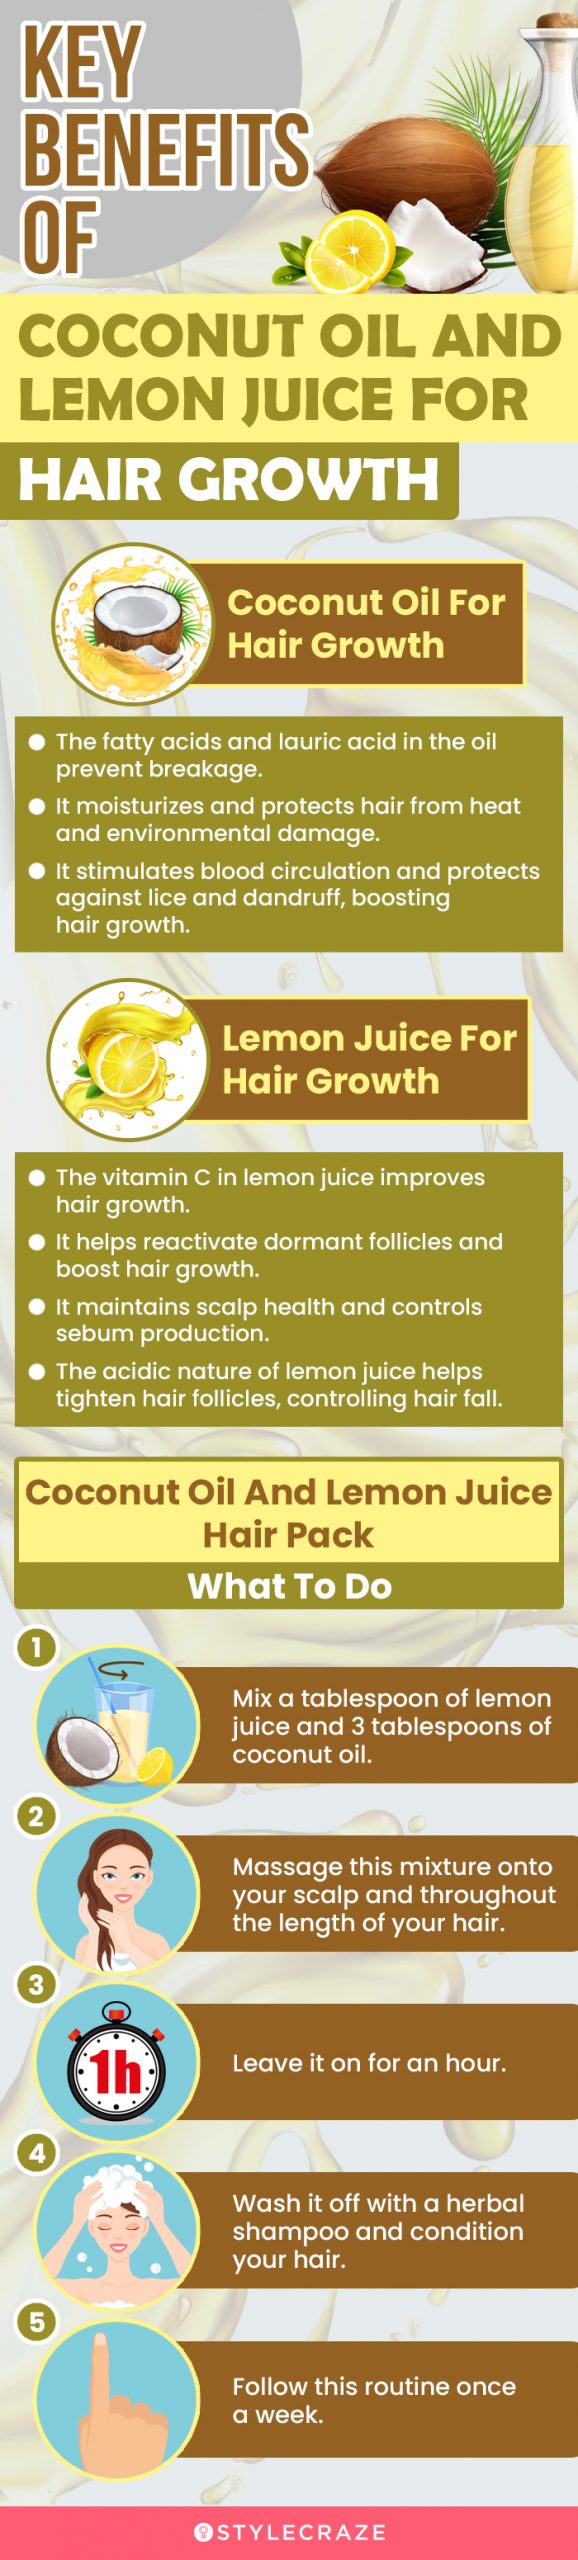 key benefits of coconut oil and lemon juice for hair growth [infographic]